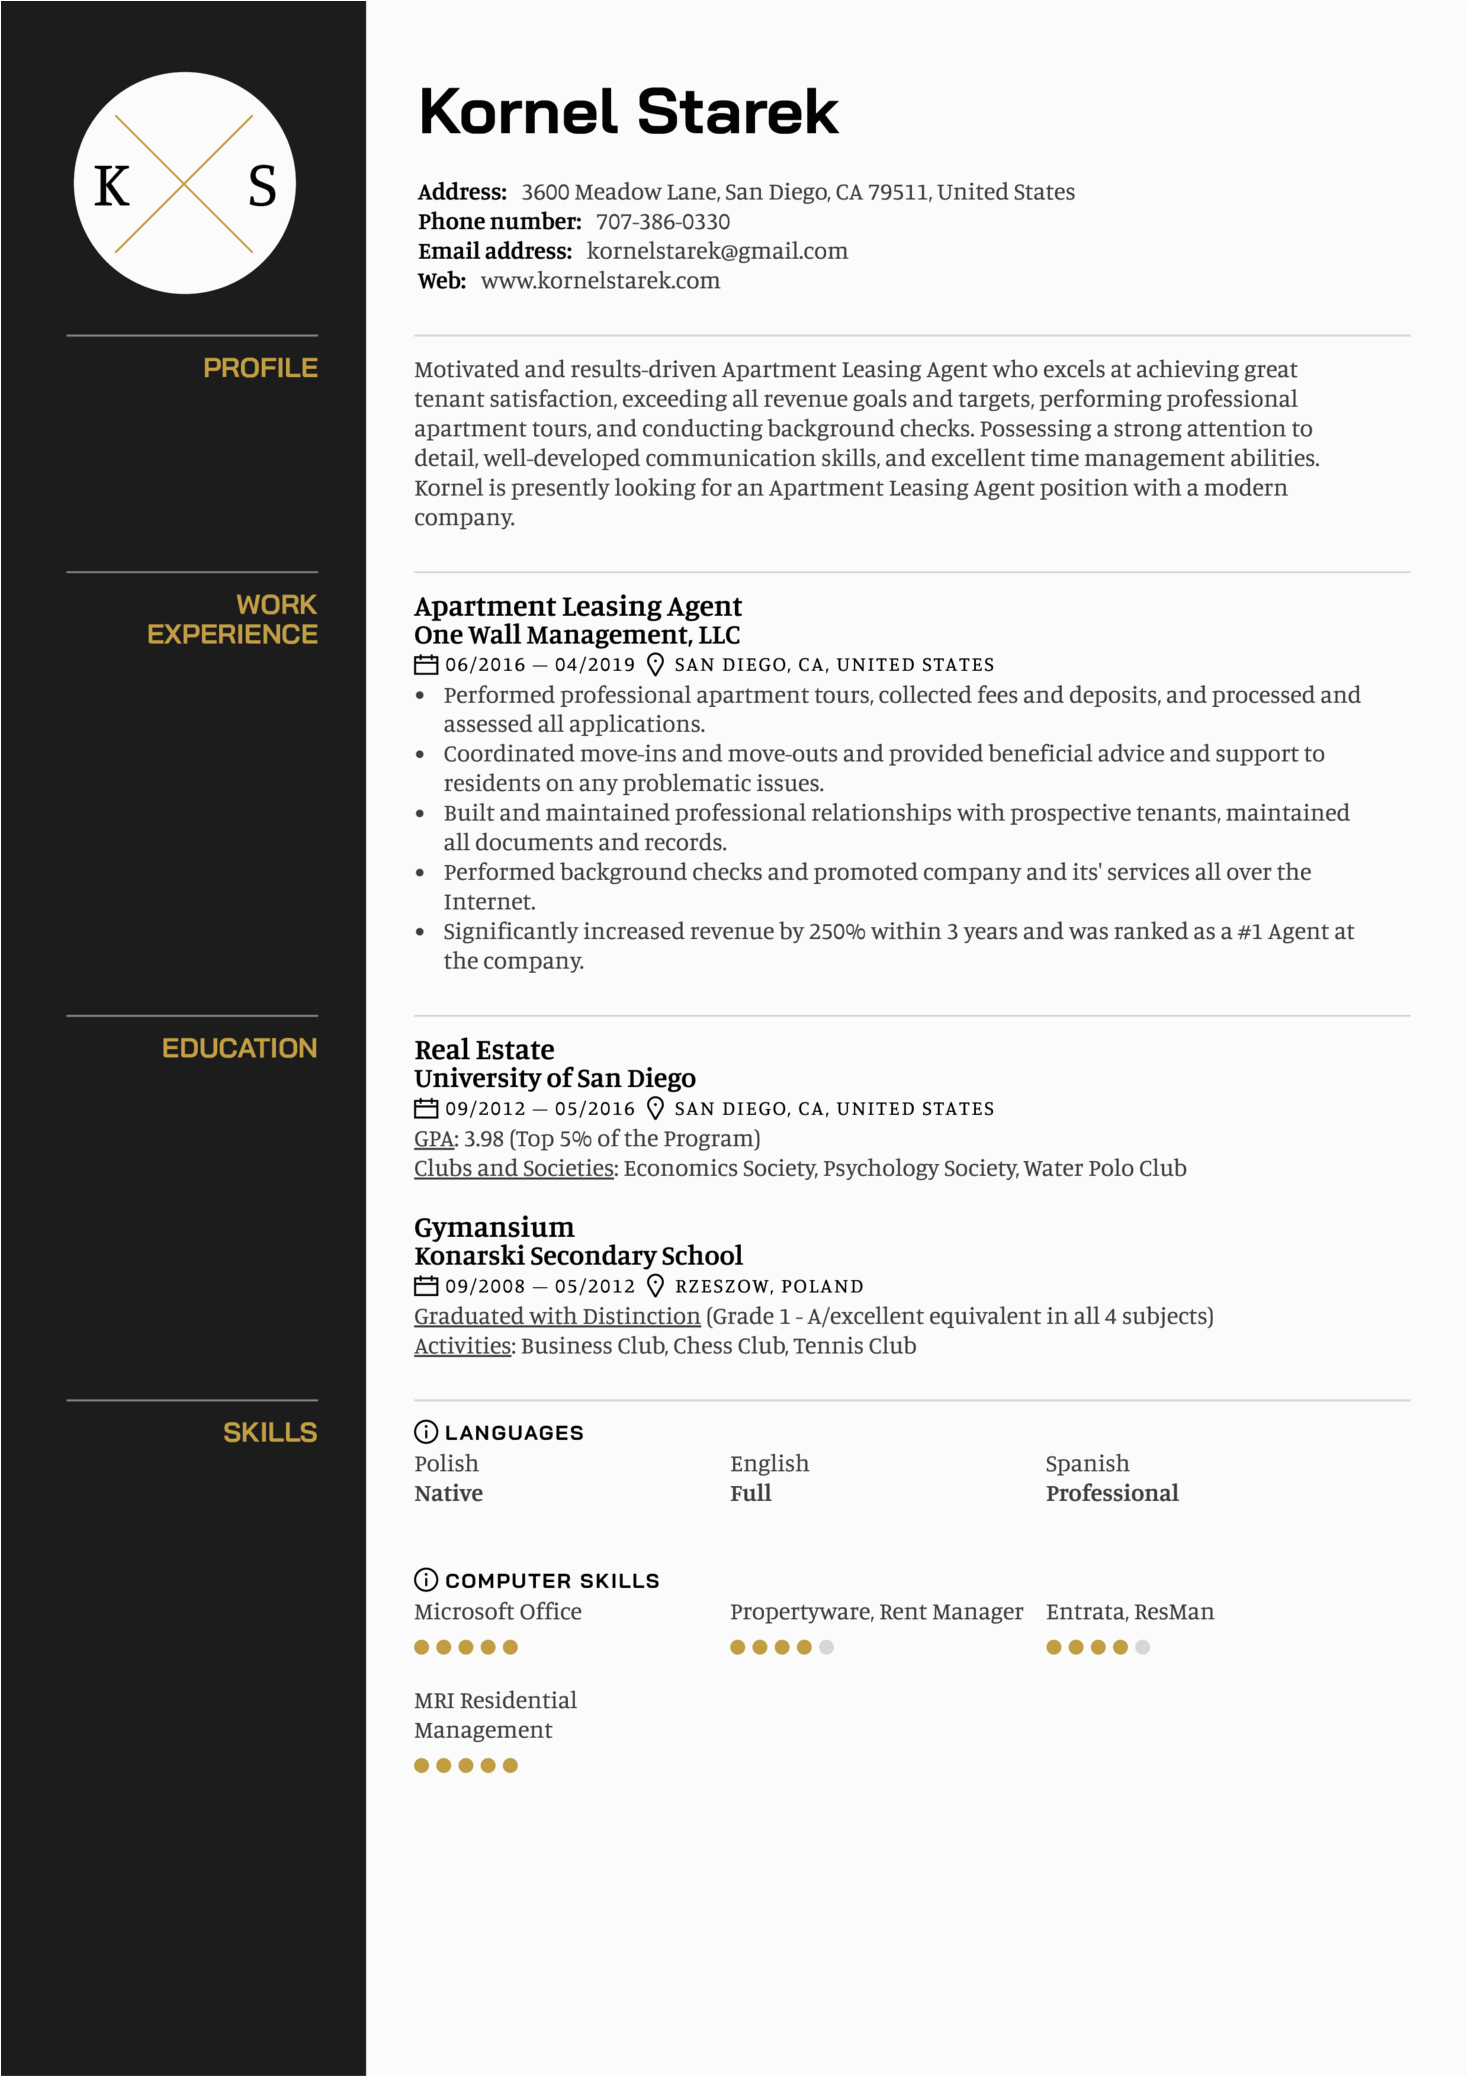 Resume Samples for Apartment Leasing Agent Apartment Leasing Agent Resume Sample